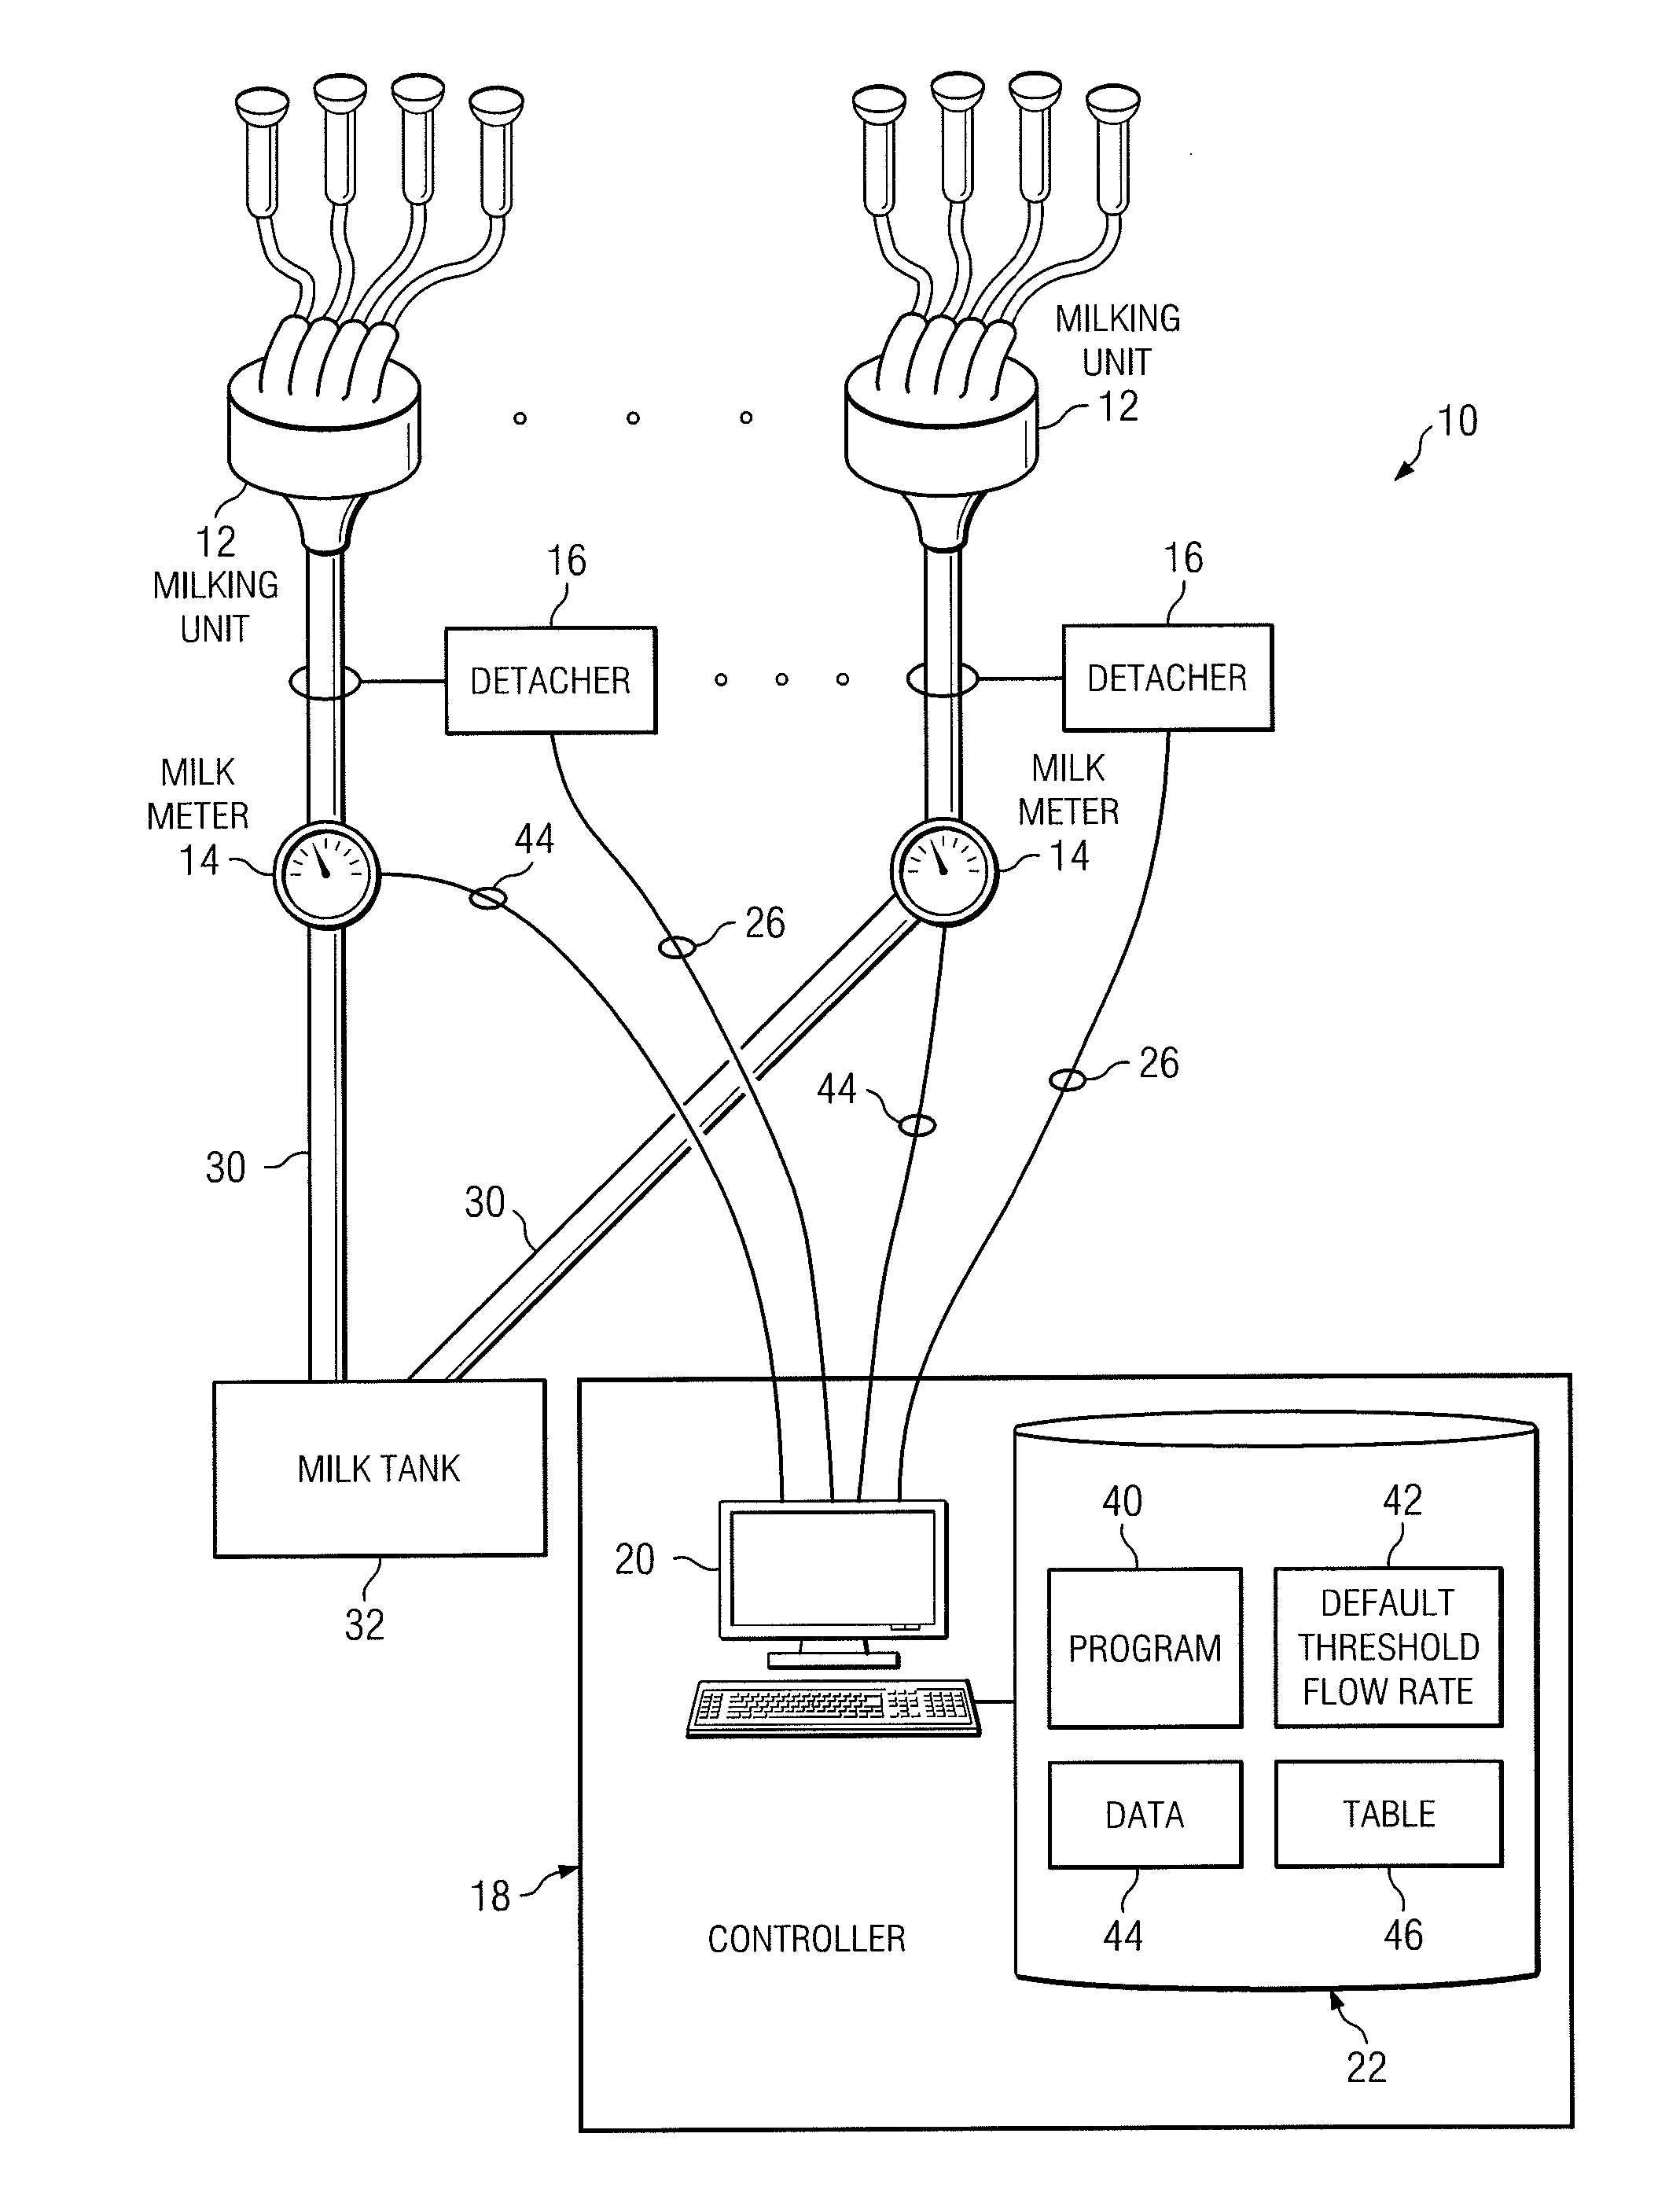 System and method for implementing an adaptive milking process